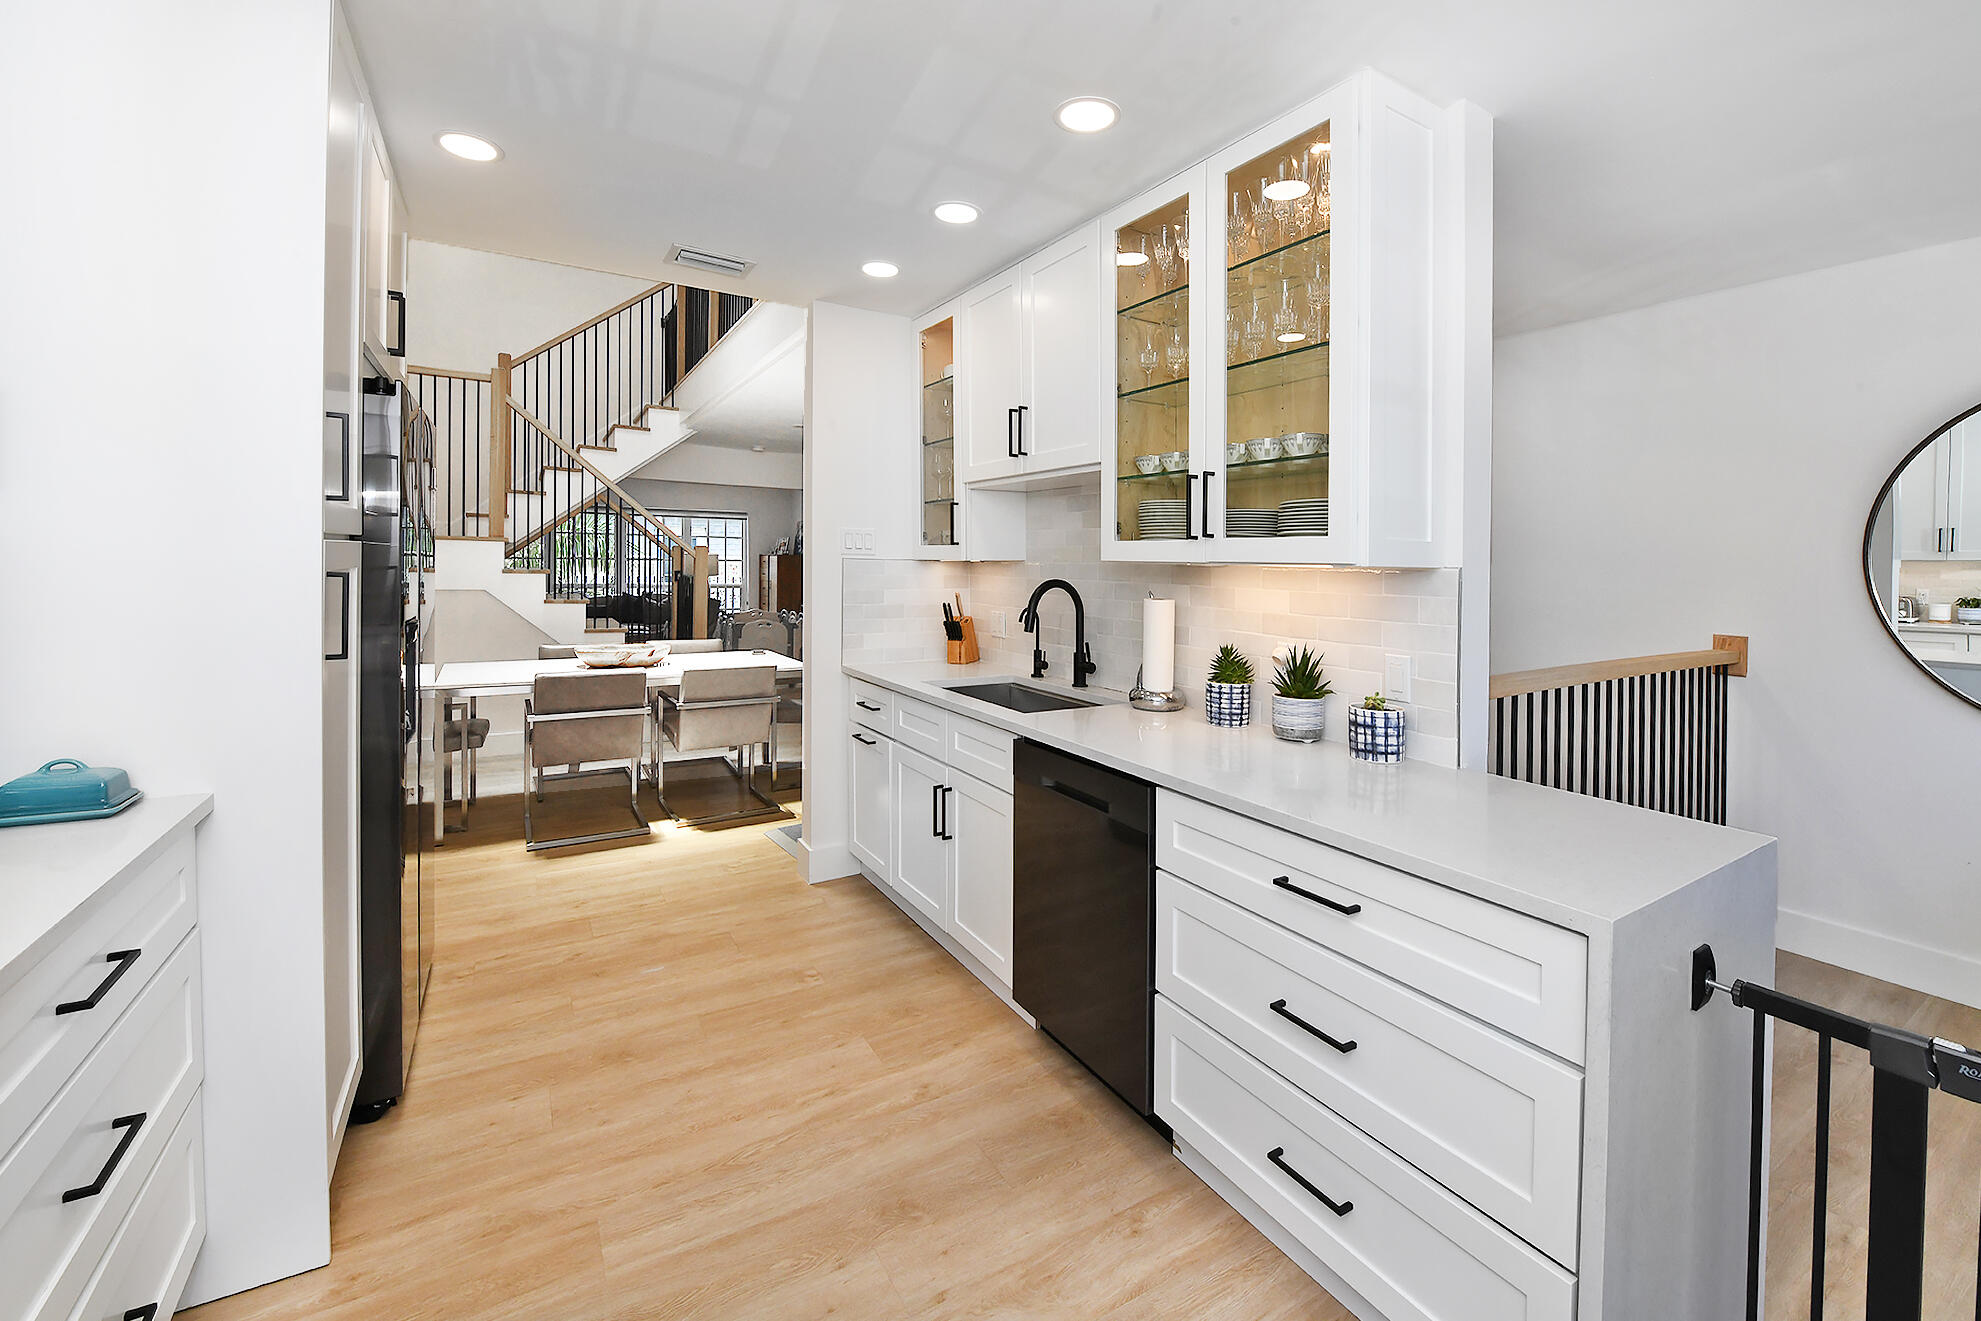 a kitchen with stainless steel appliances kitchen island granite countertop a sink cabinets and wooden floor